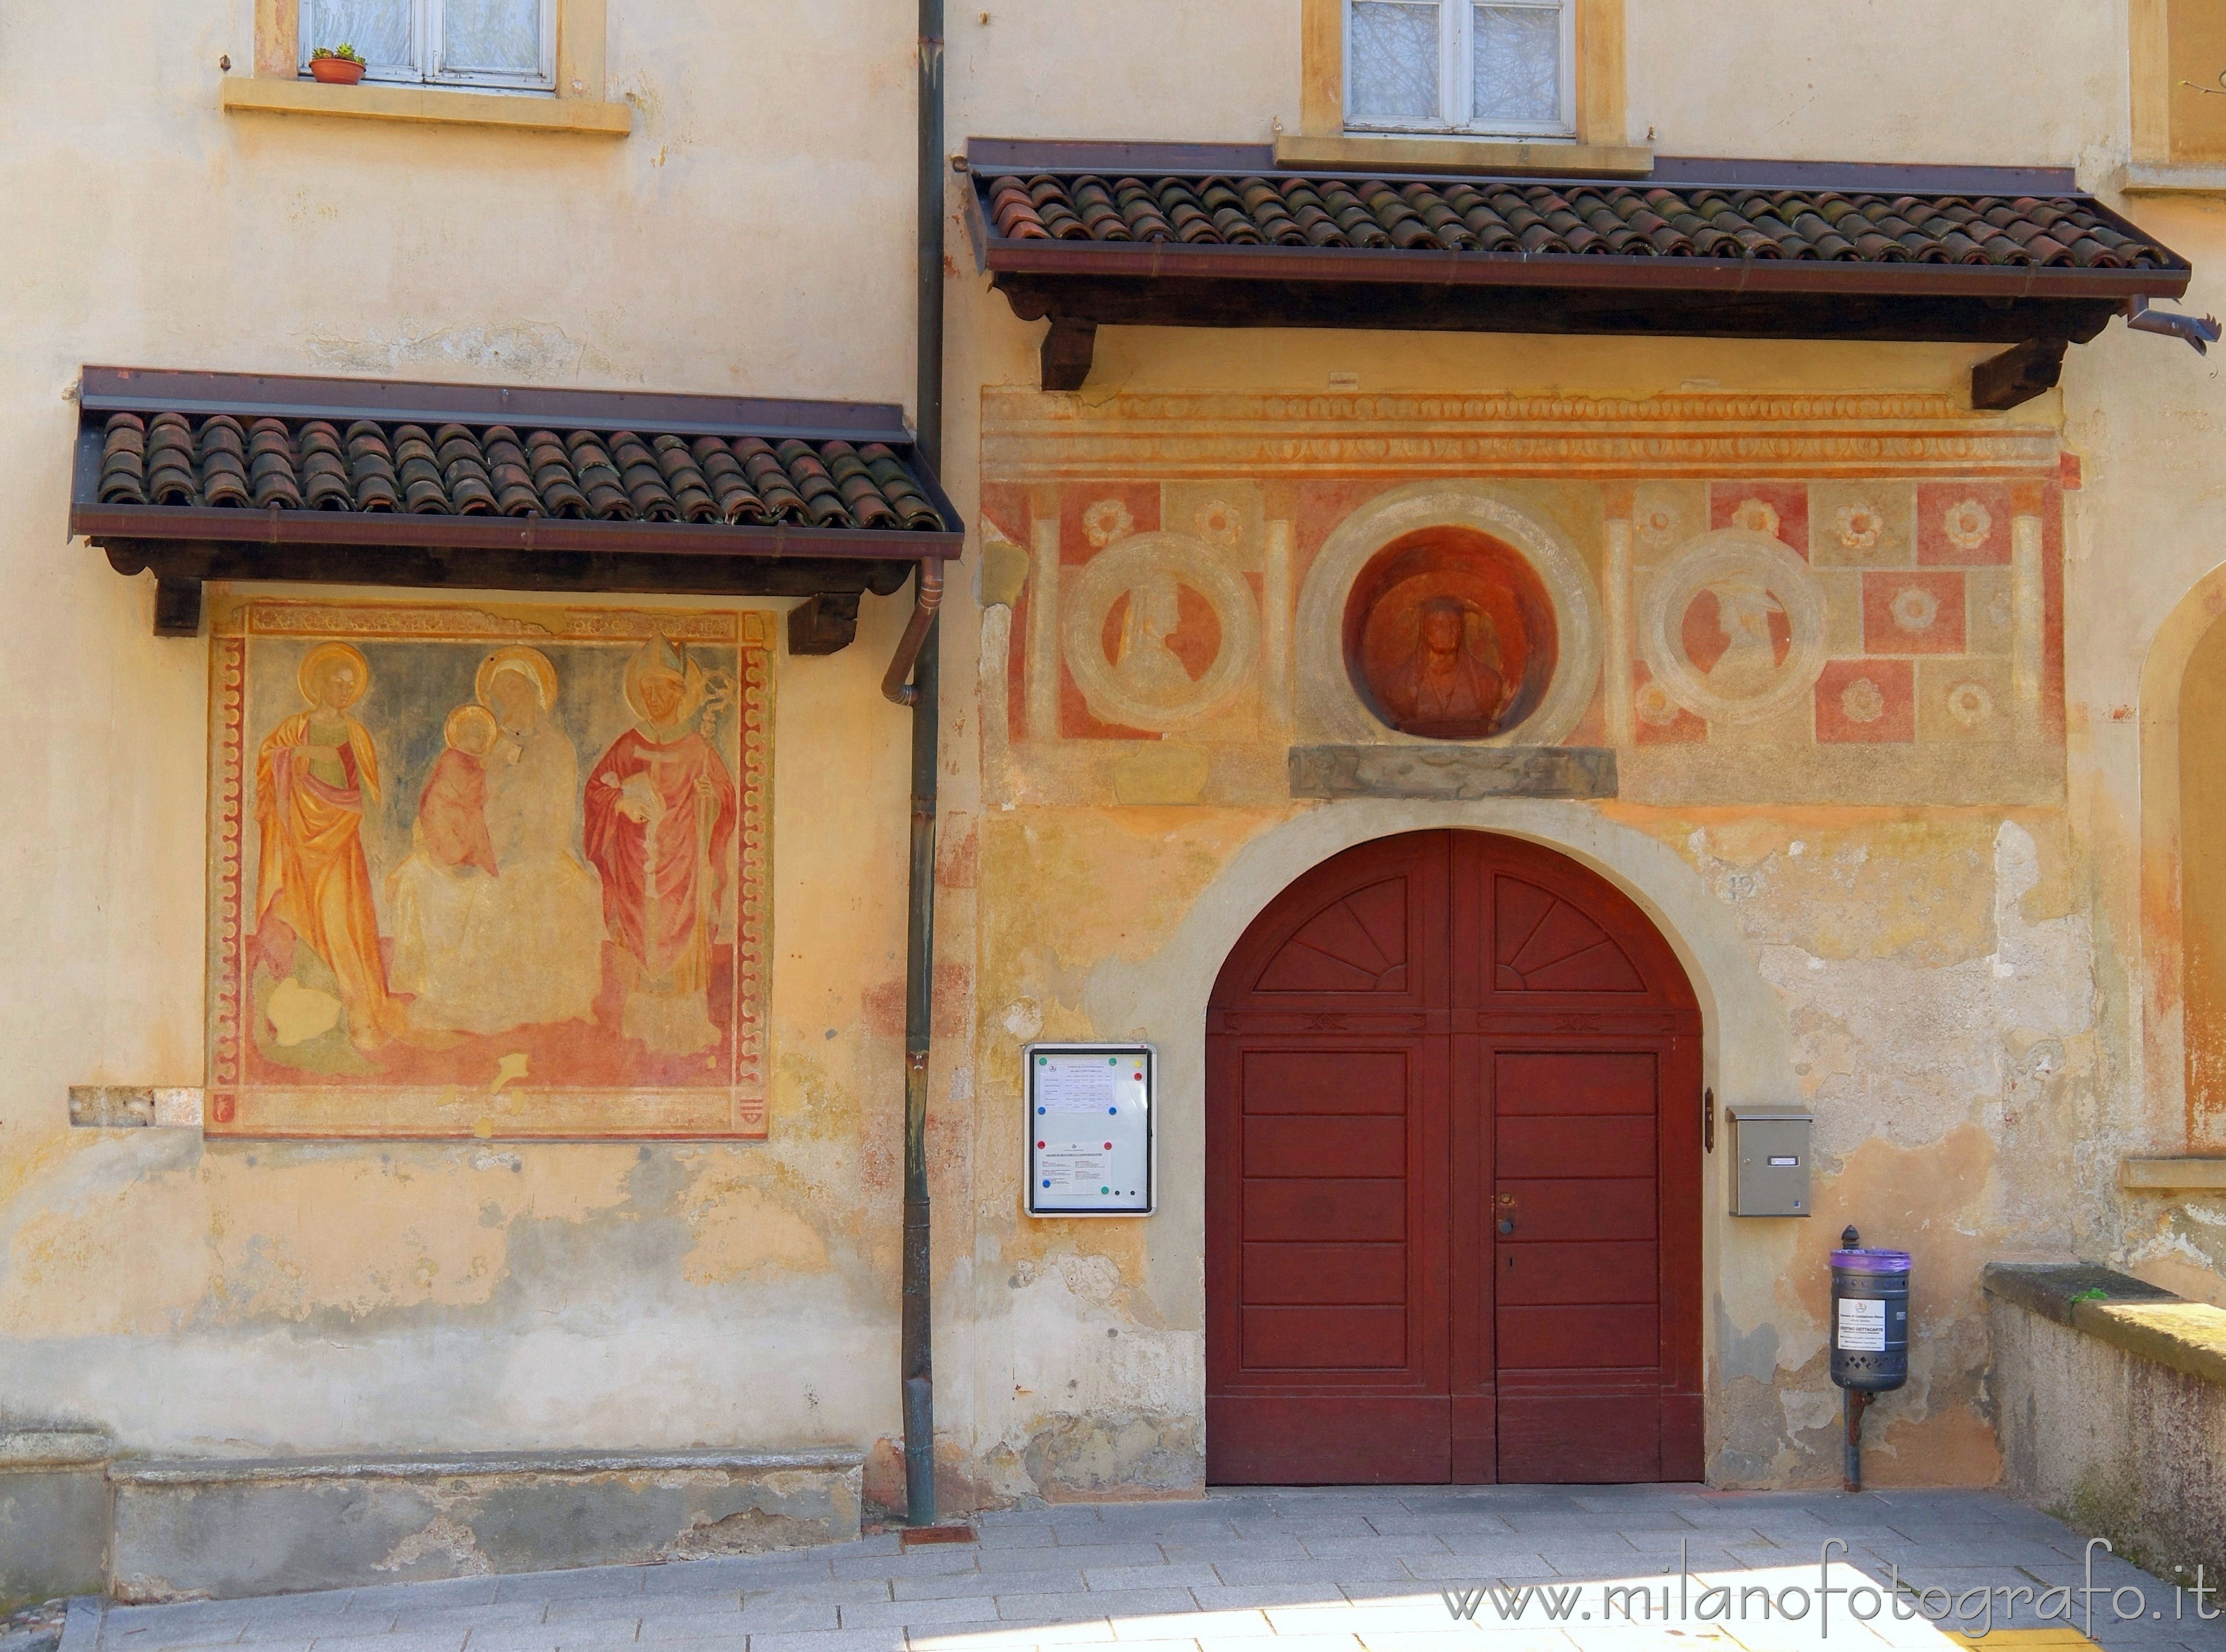 Castiglione Olona (Varese, Italy): Frescoes on the facade of the School of Music and Grammar "Scholastica" - Castiglione Olona (Varese, Italy)